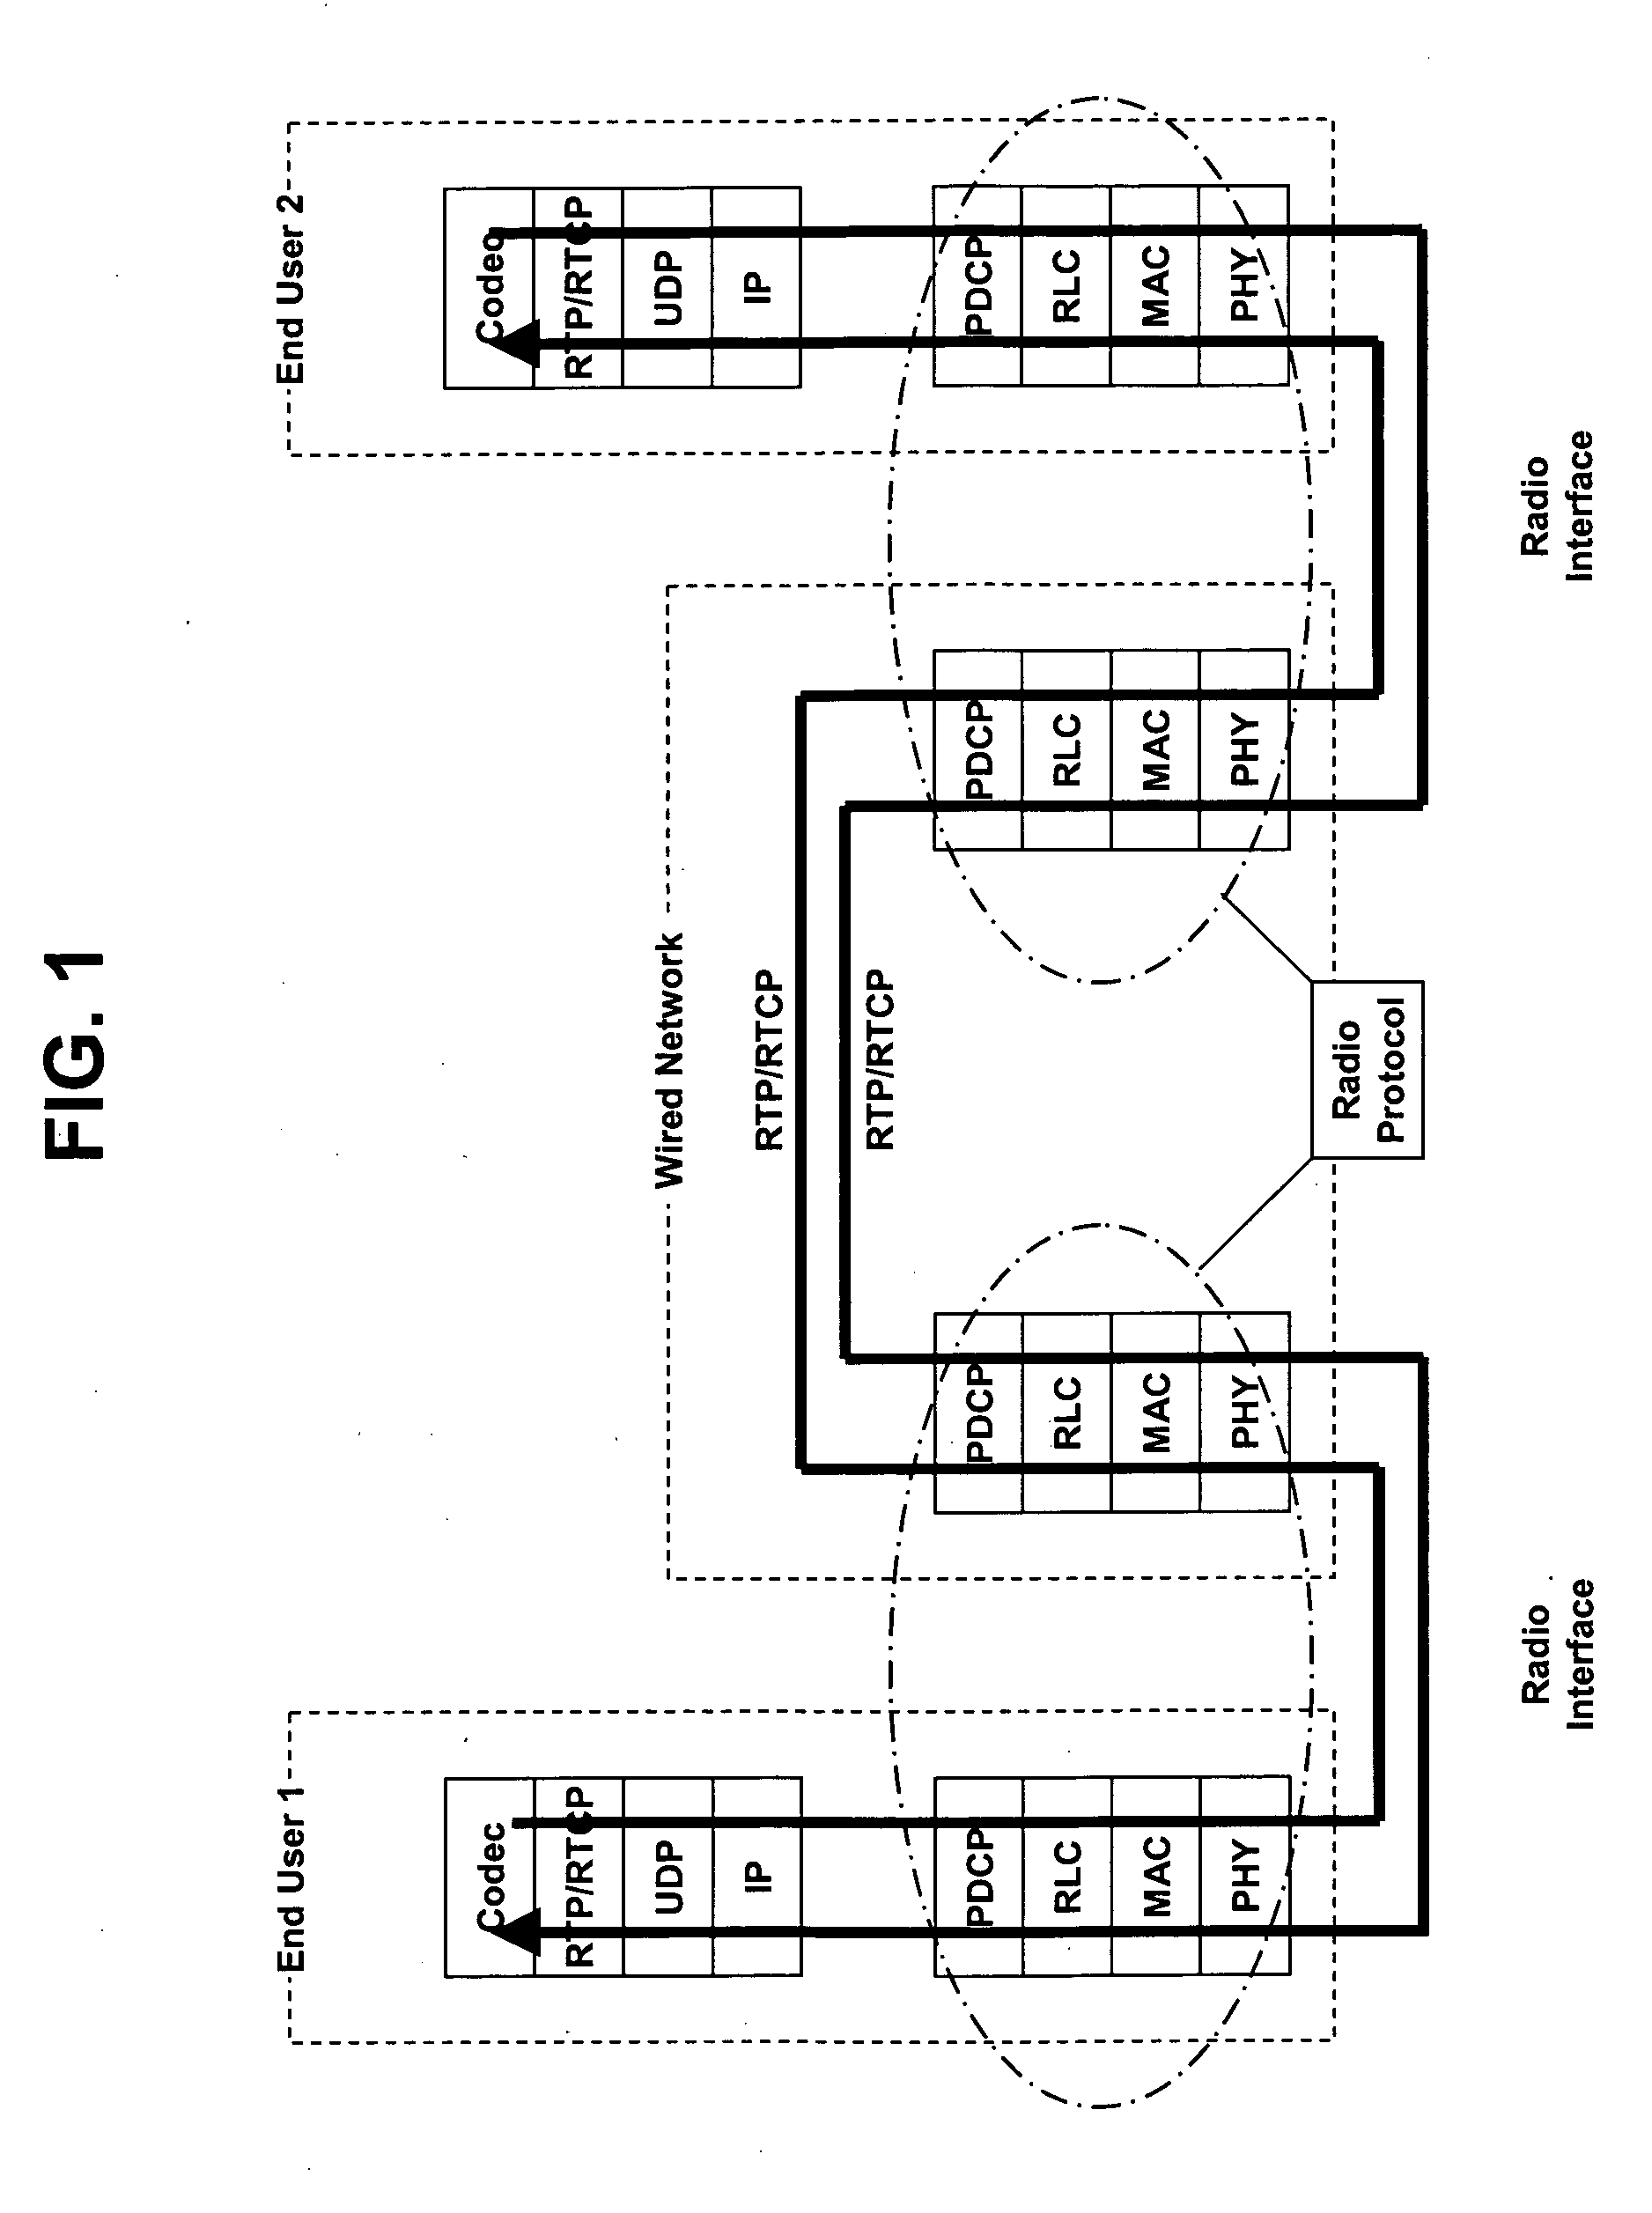 Optimized radio bearer configuration for voice over IP